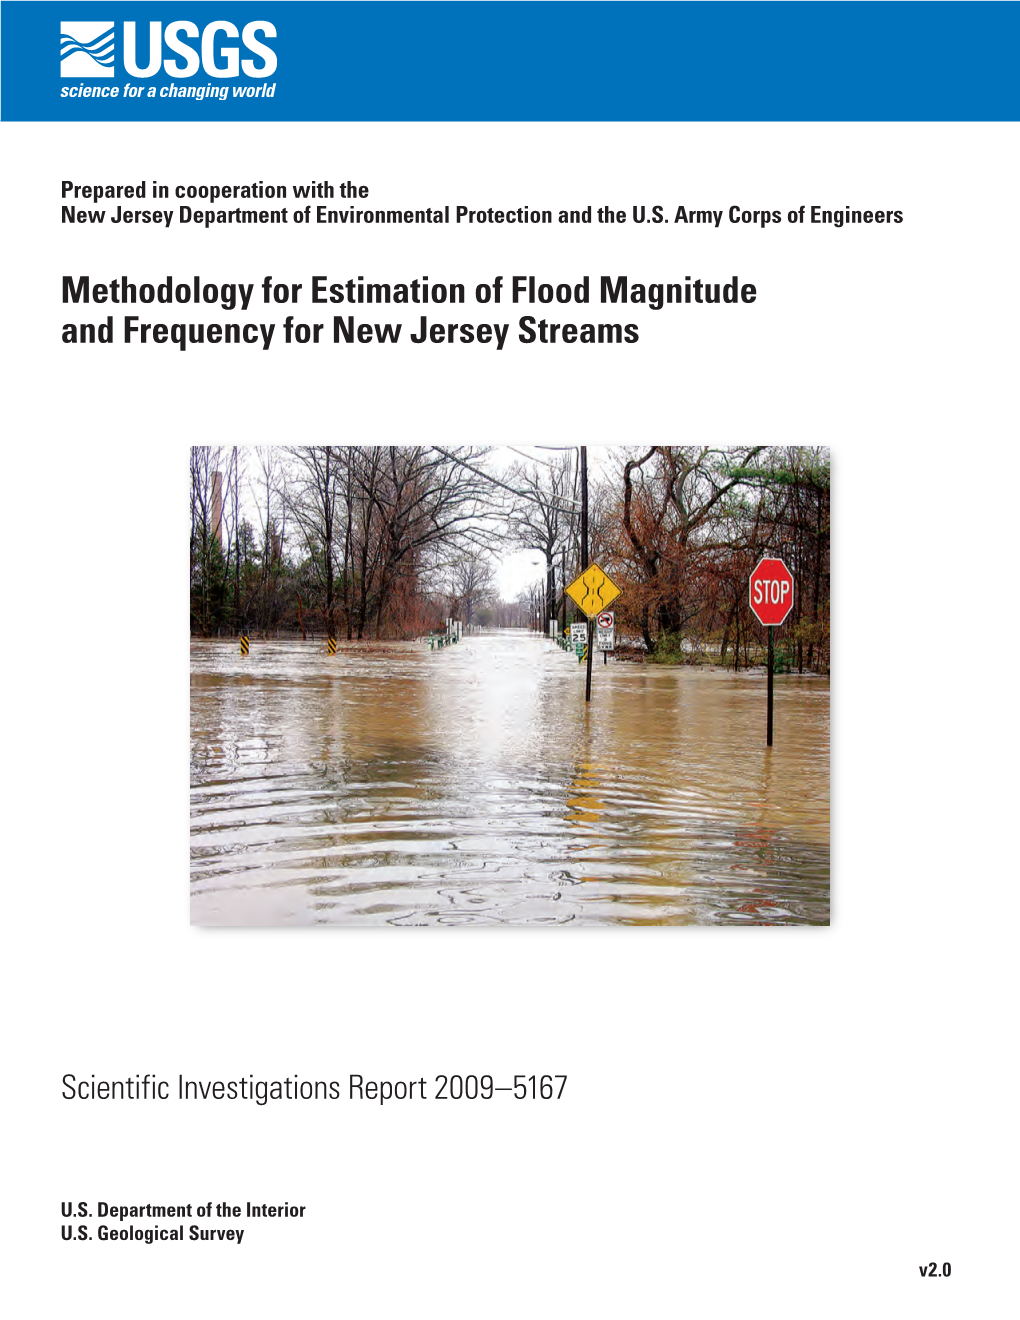 Methodology for Estimation of Flood Magnitude and Frequency for New Jersey Streams